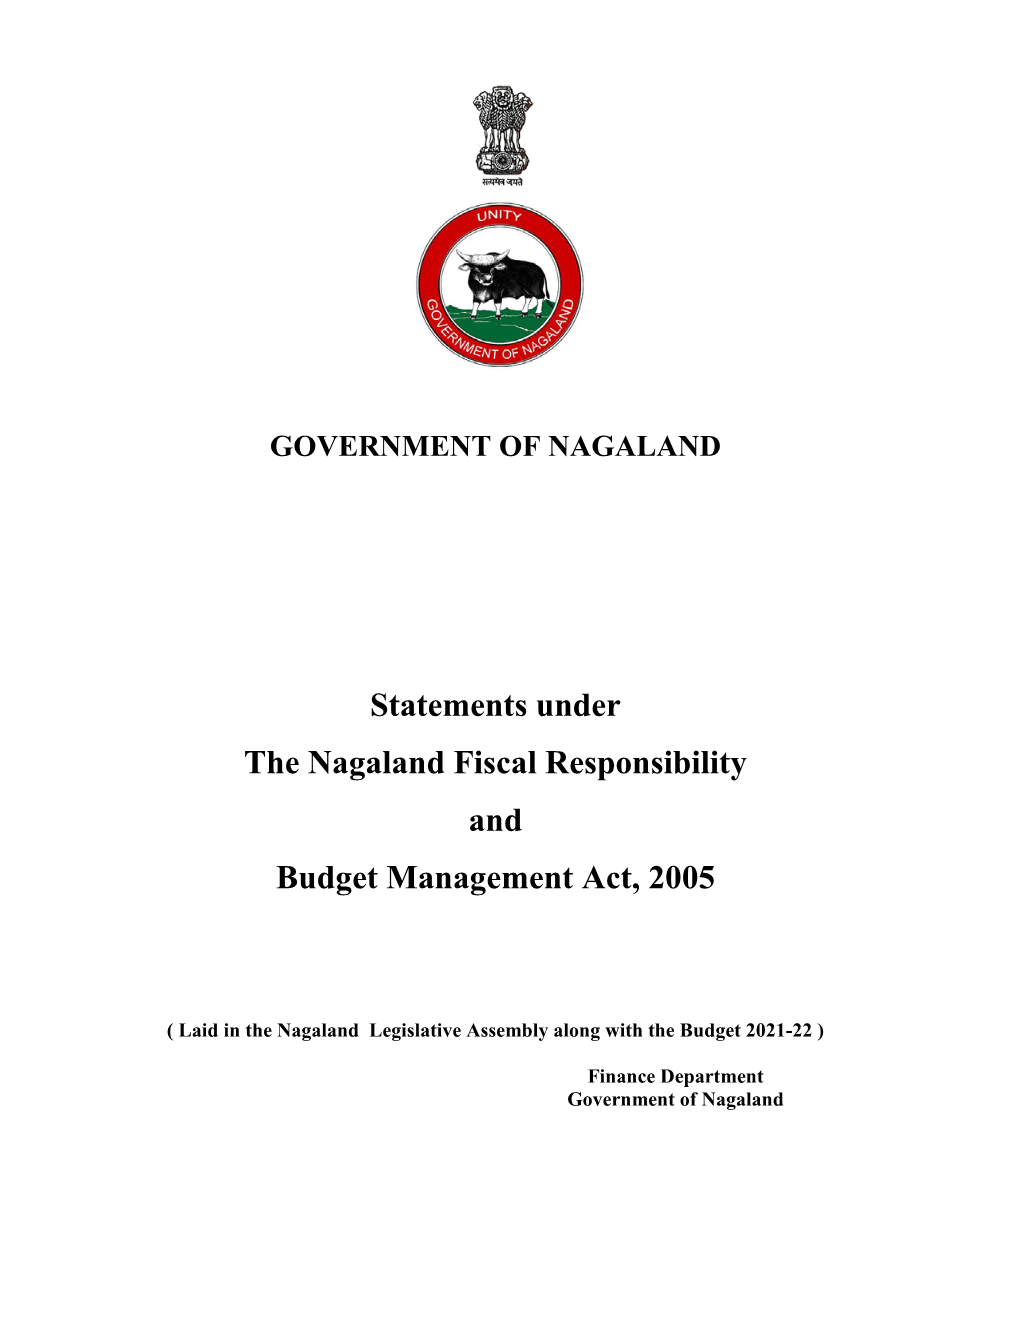 Statements Under the Nagaland Fiscal Responsibility and Budget